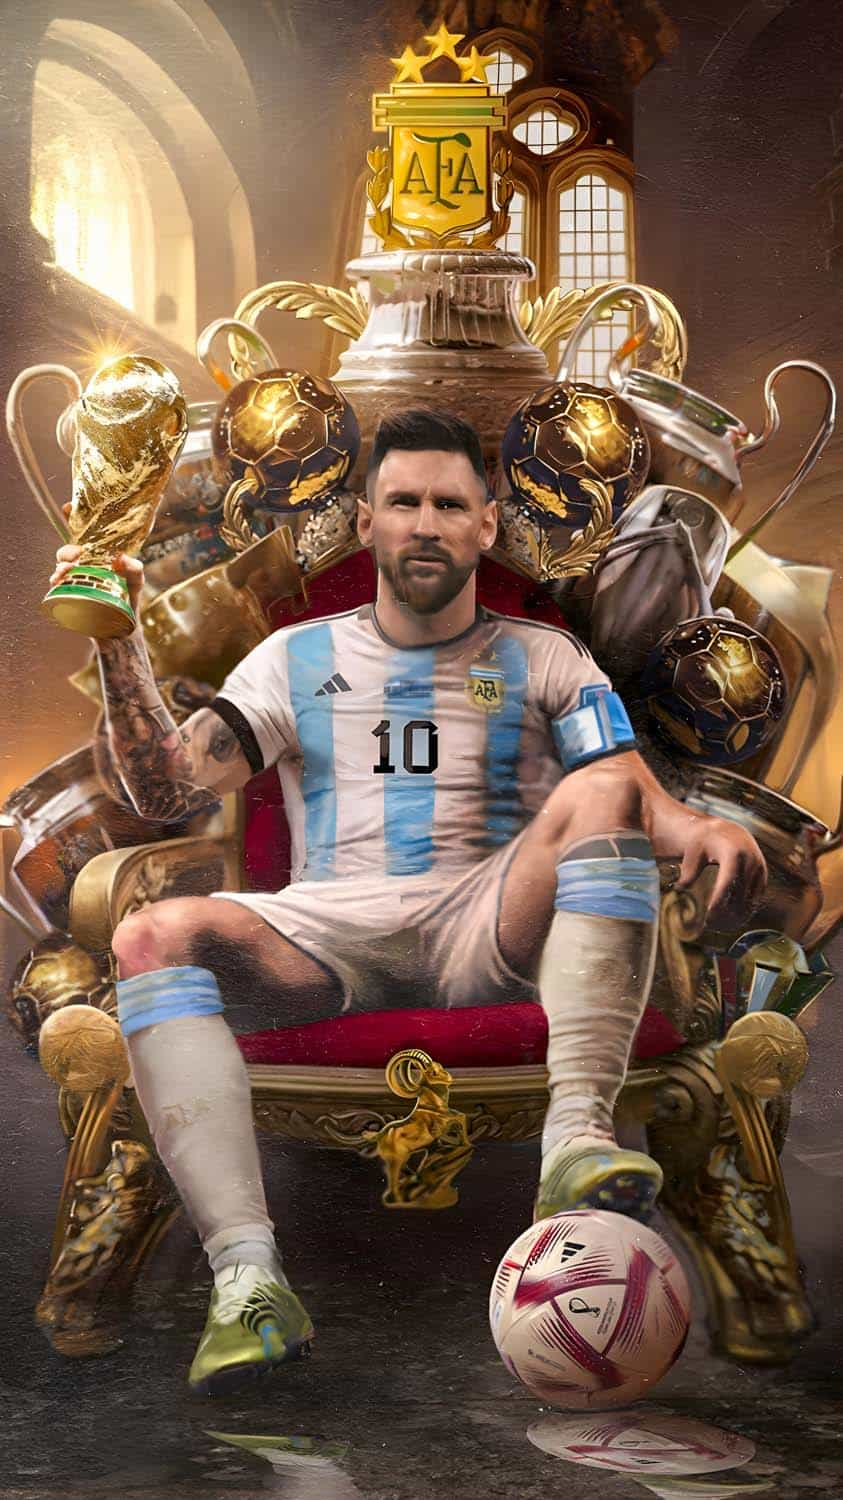 Messi Football King IPhone Wallpaper HD - IPhone Wallpapers